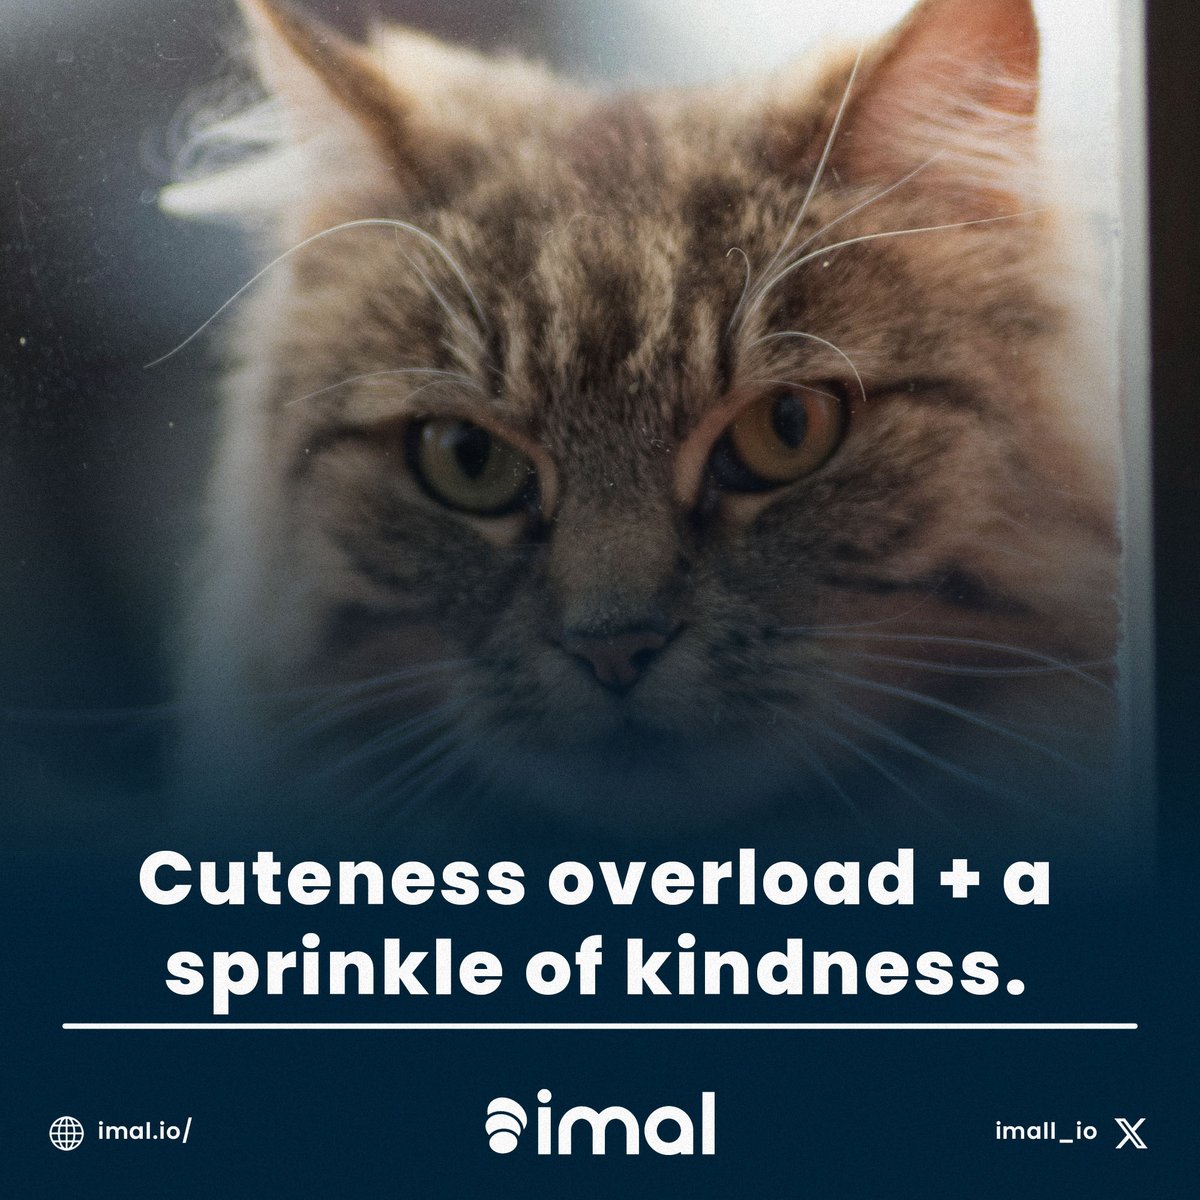 Sprinkle a little kindness on the world today, with IMAL